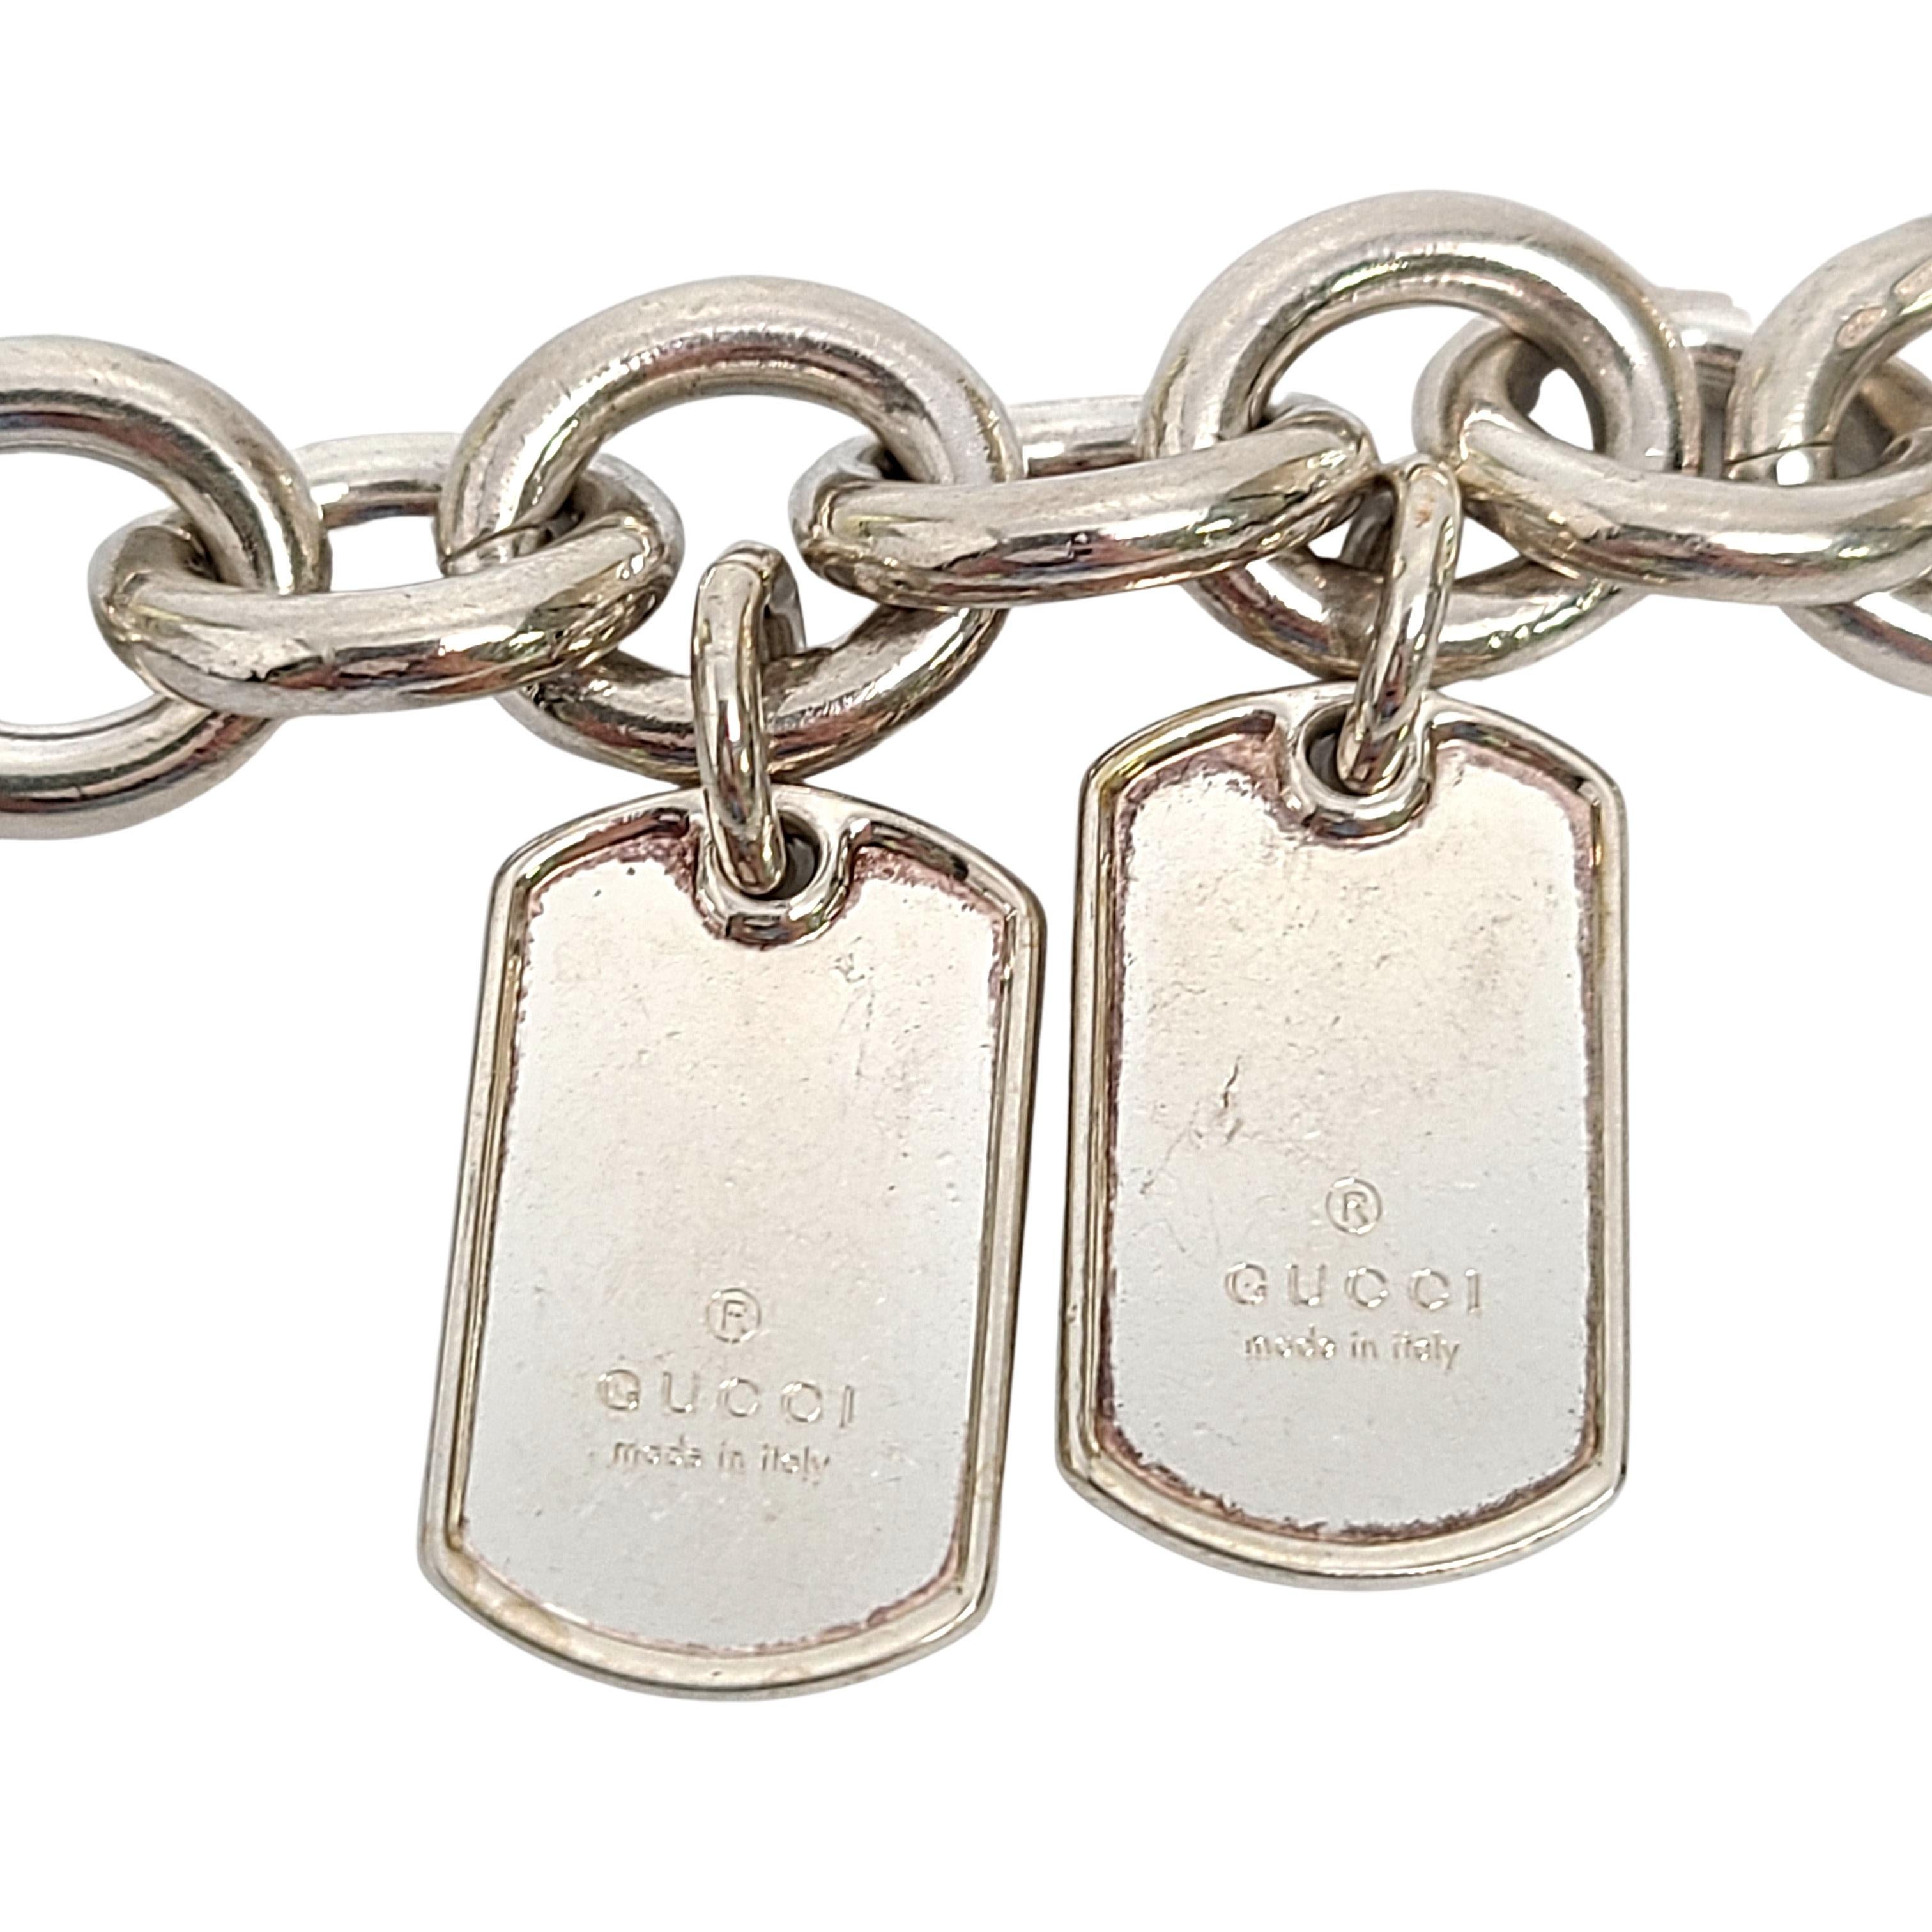 Sterling silver rolo link bracelet with 2 GUCCI dog tags by Gucci.

Heavy and substantial smooth oval shaped rolo link bracelet with 2 